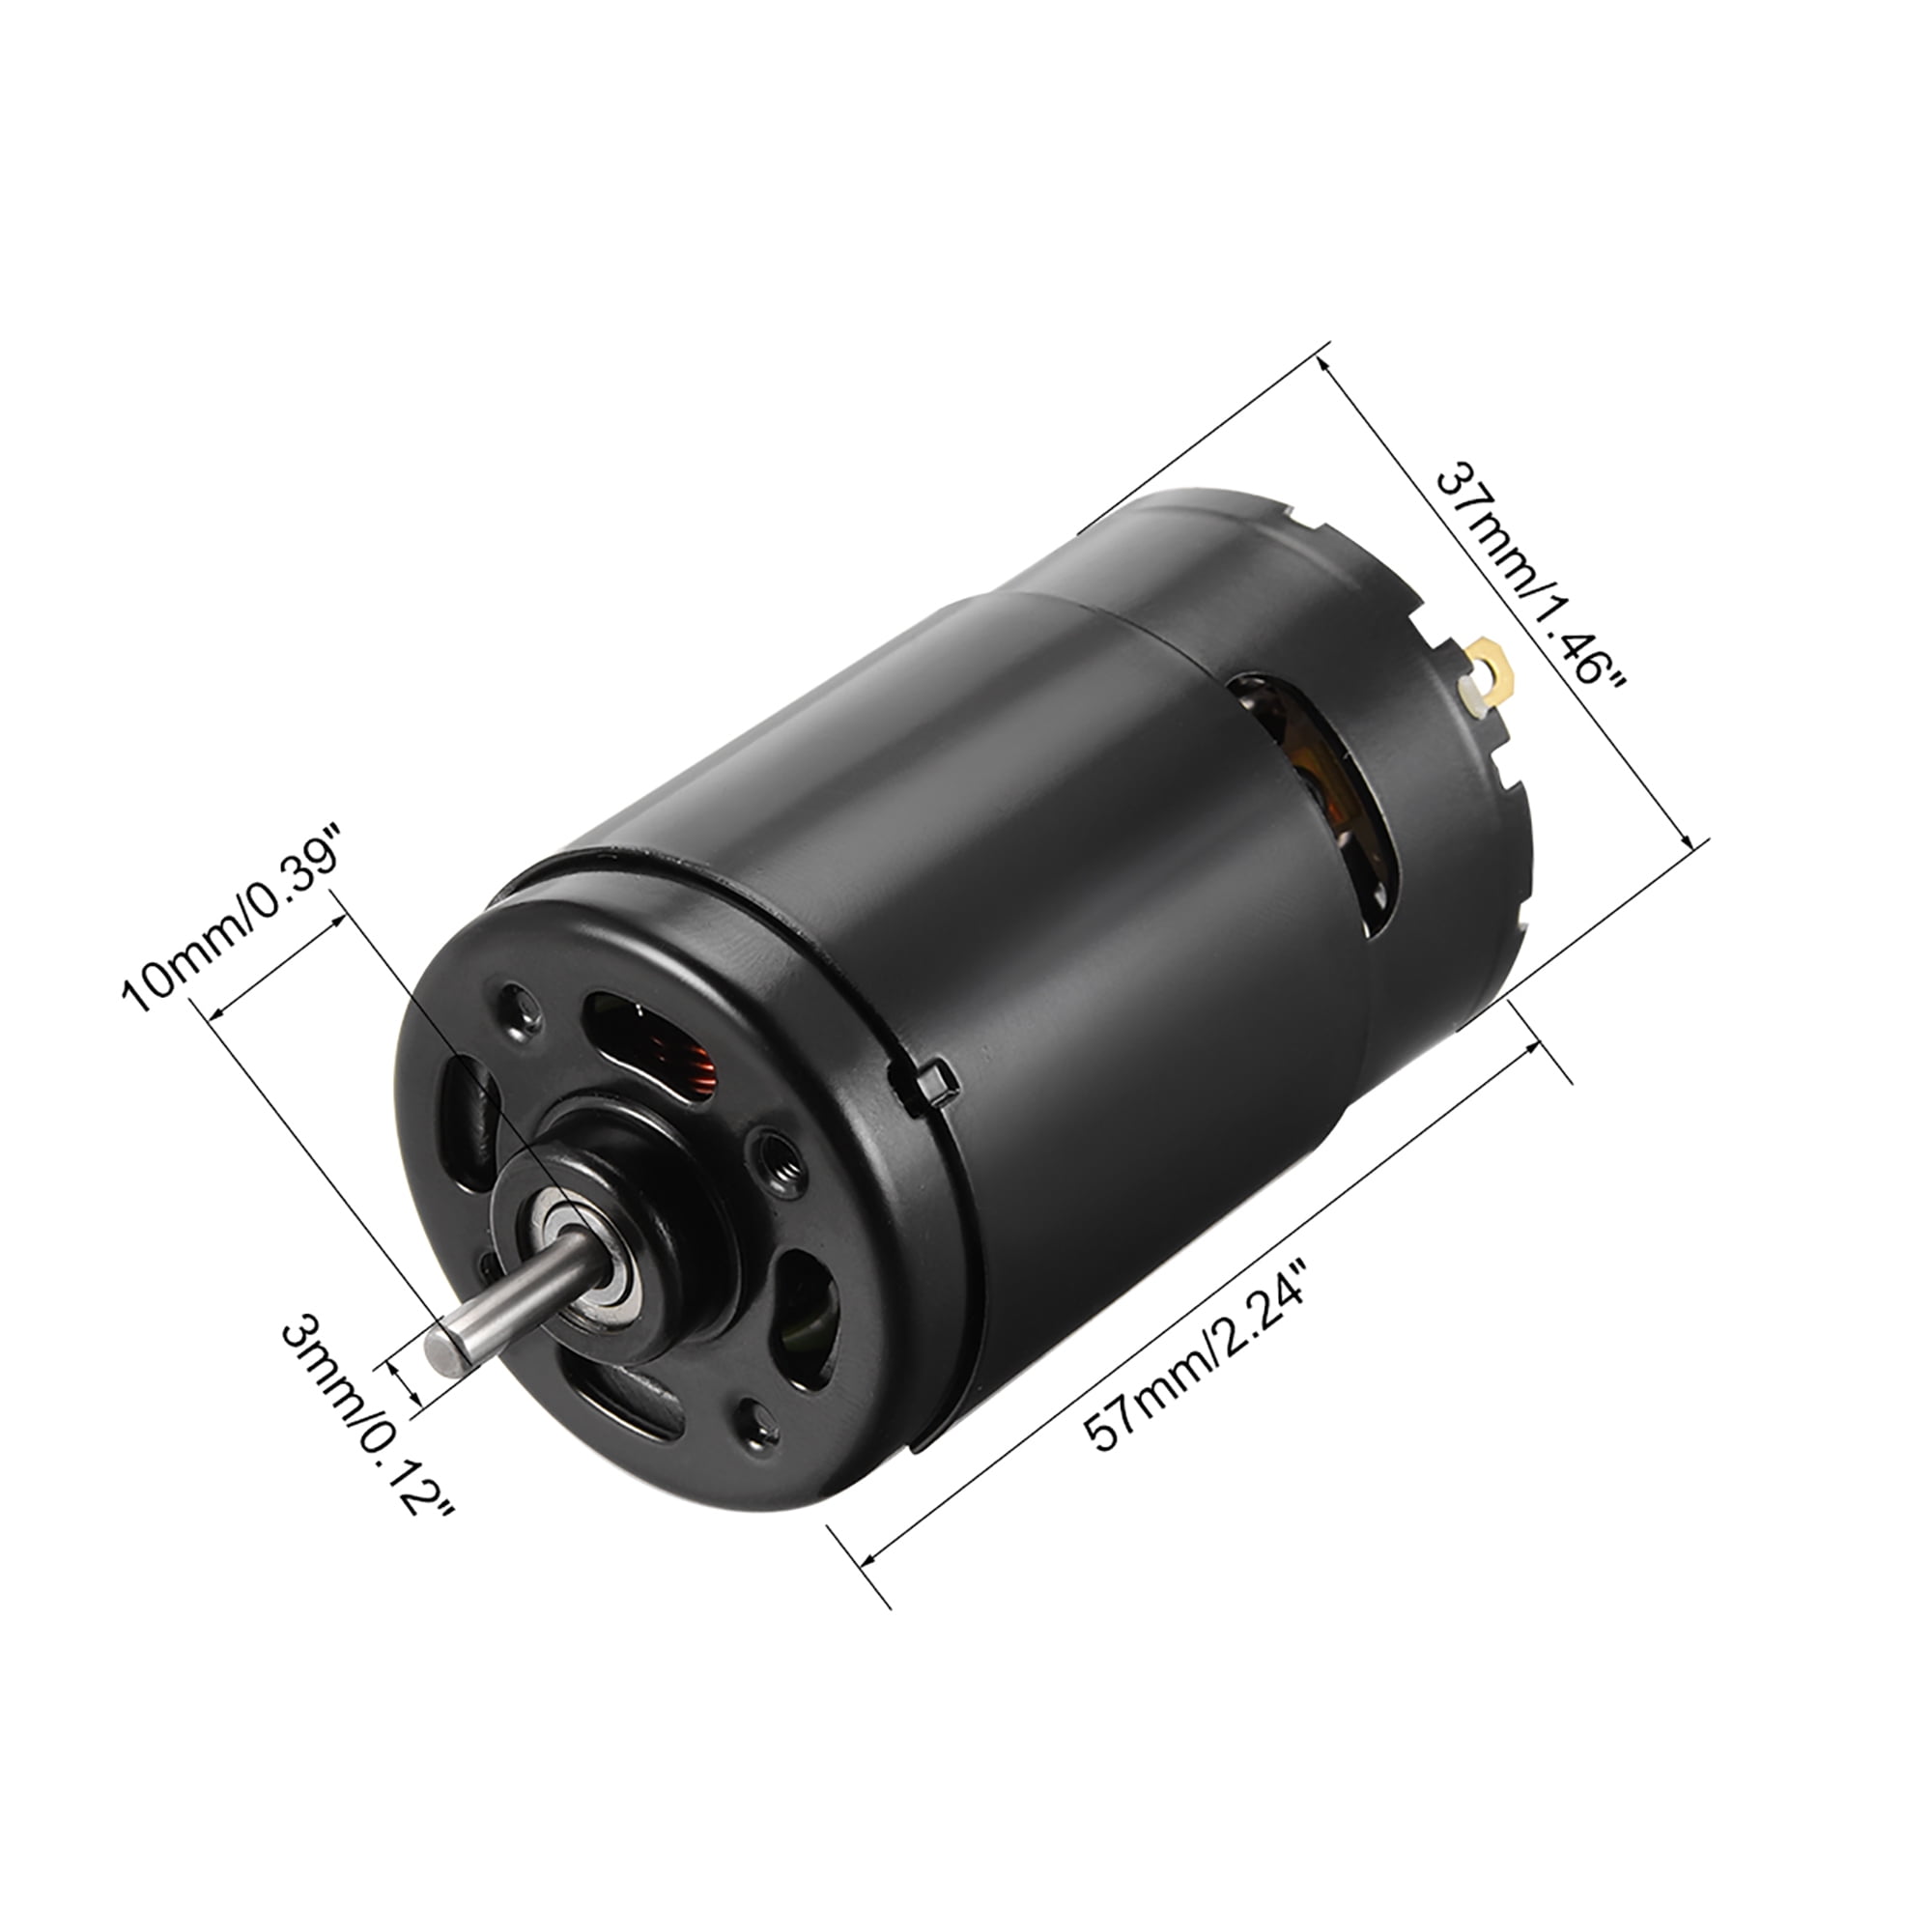 uxcell DC Motor 12V 1700RPM Electric Motor Round Shaft for RC Boat Toys Model DIY Hobby 